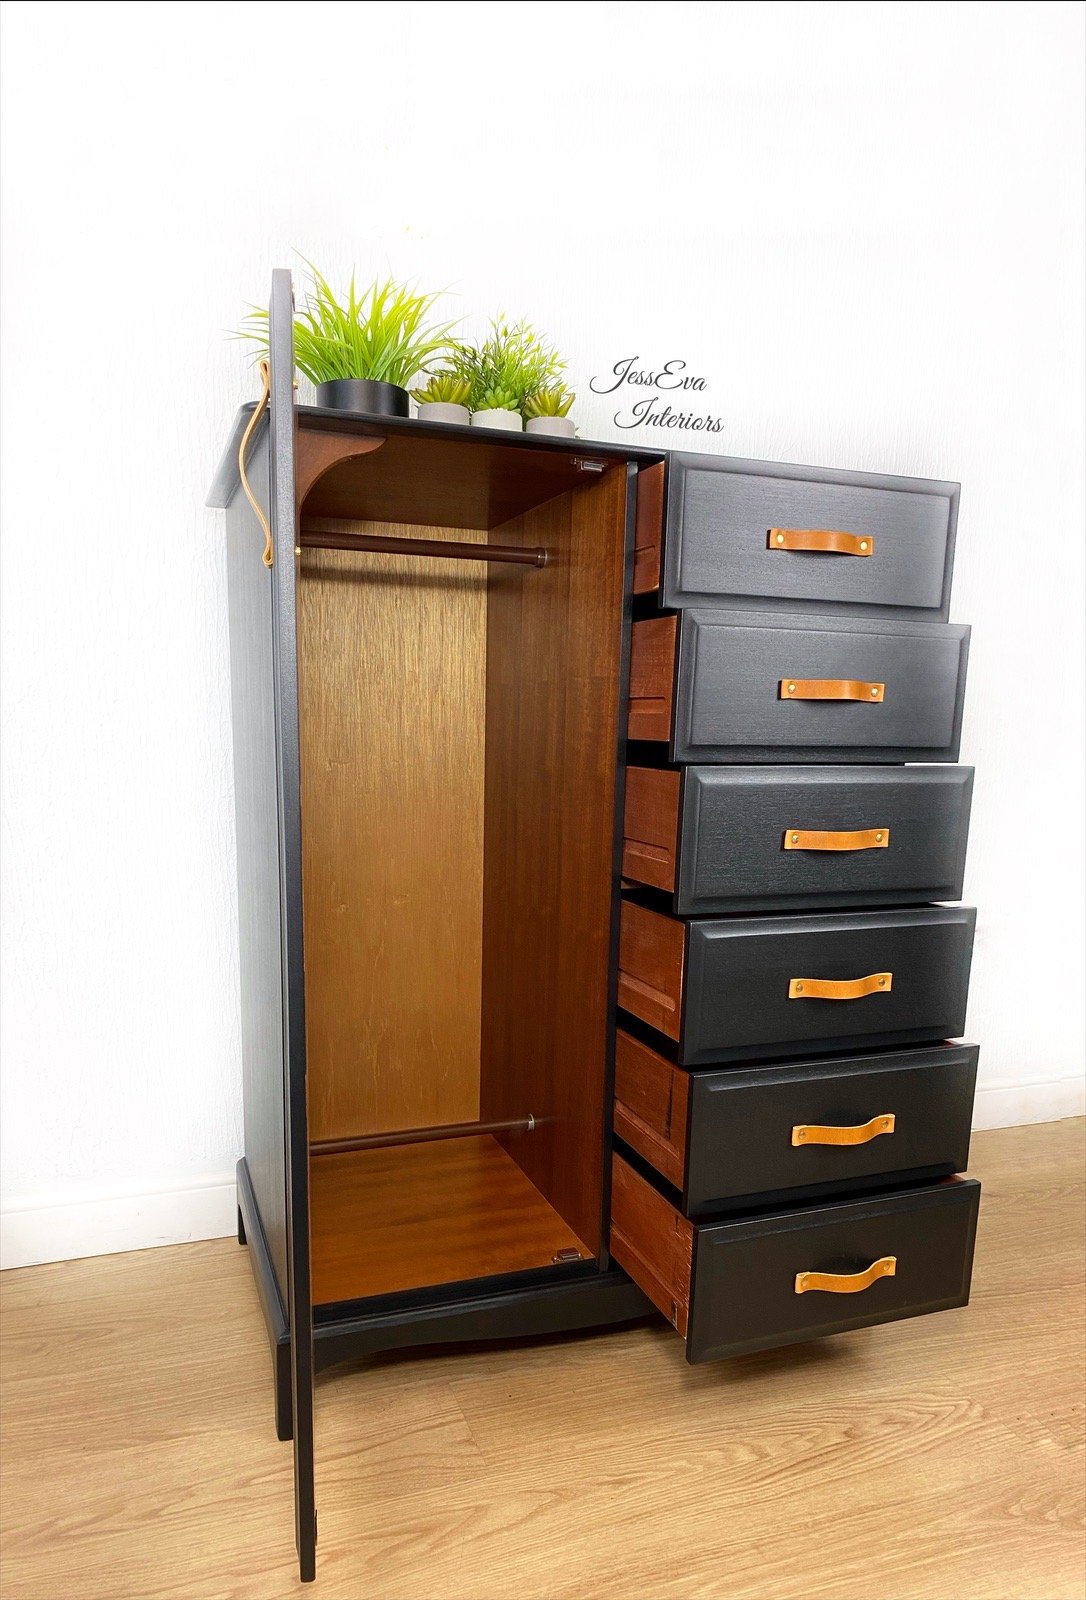 Black Stag Minstrel Gentleman’s Wardrobe / Tallboy with Drawers with leather handles 